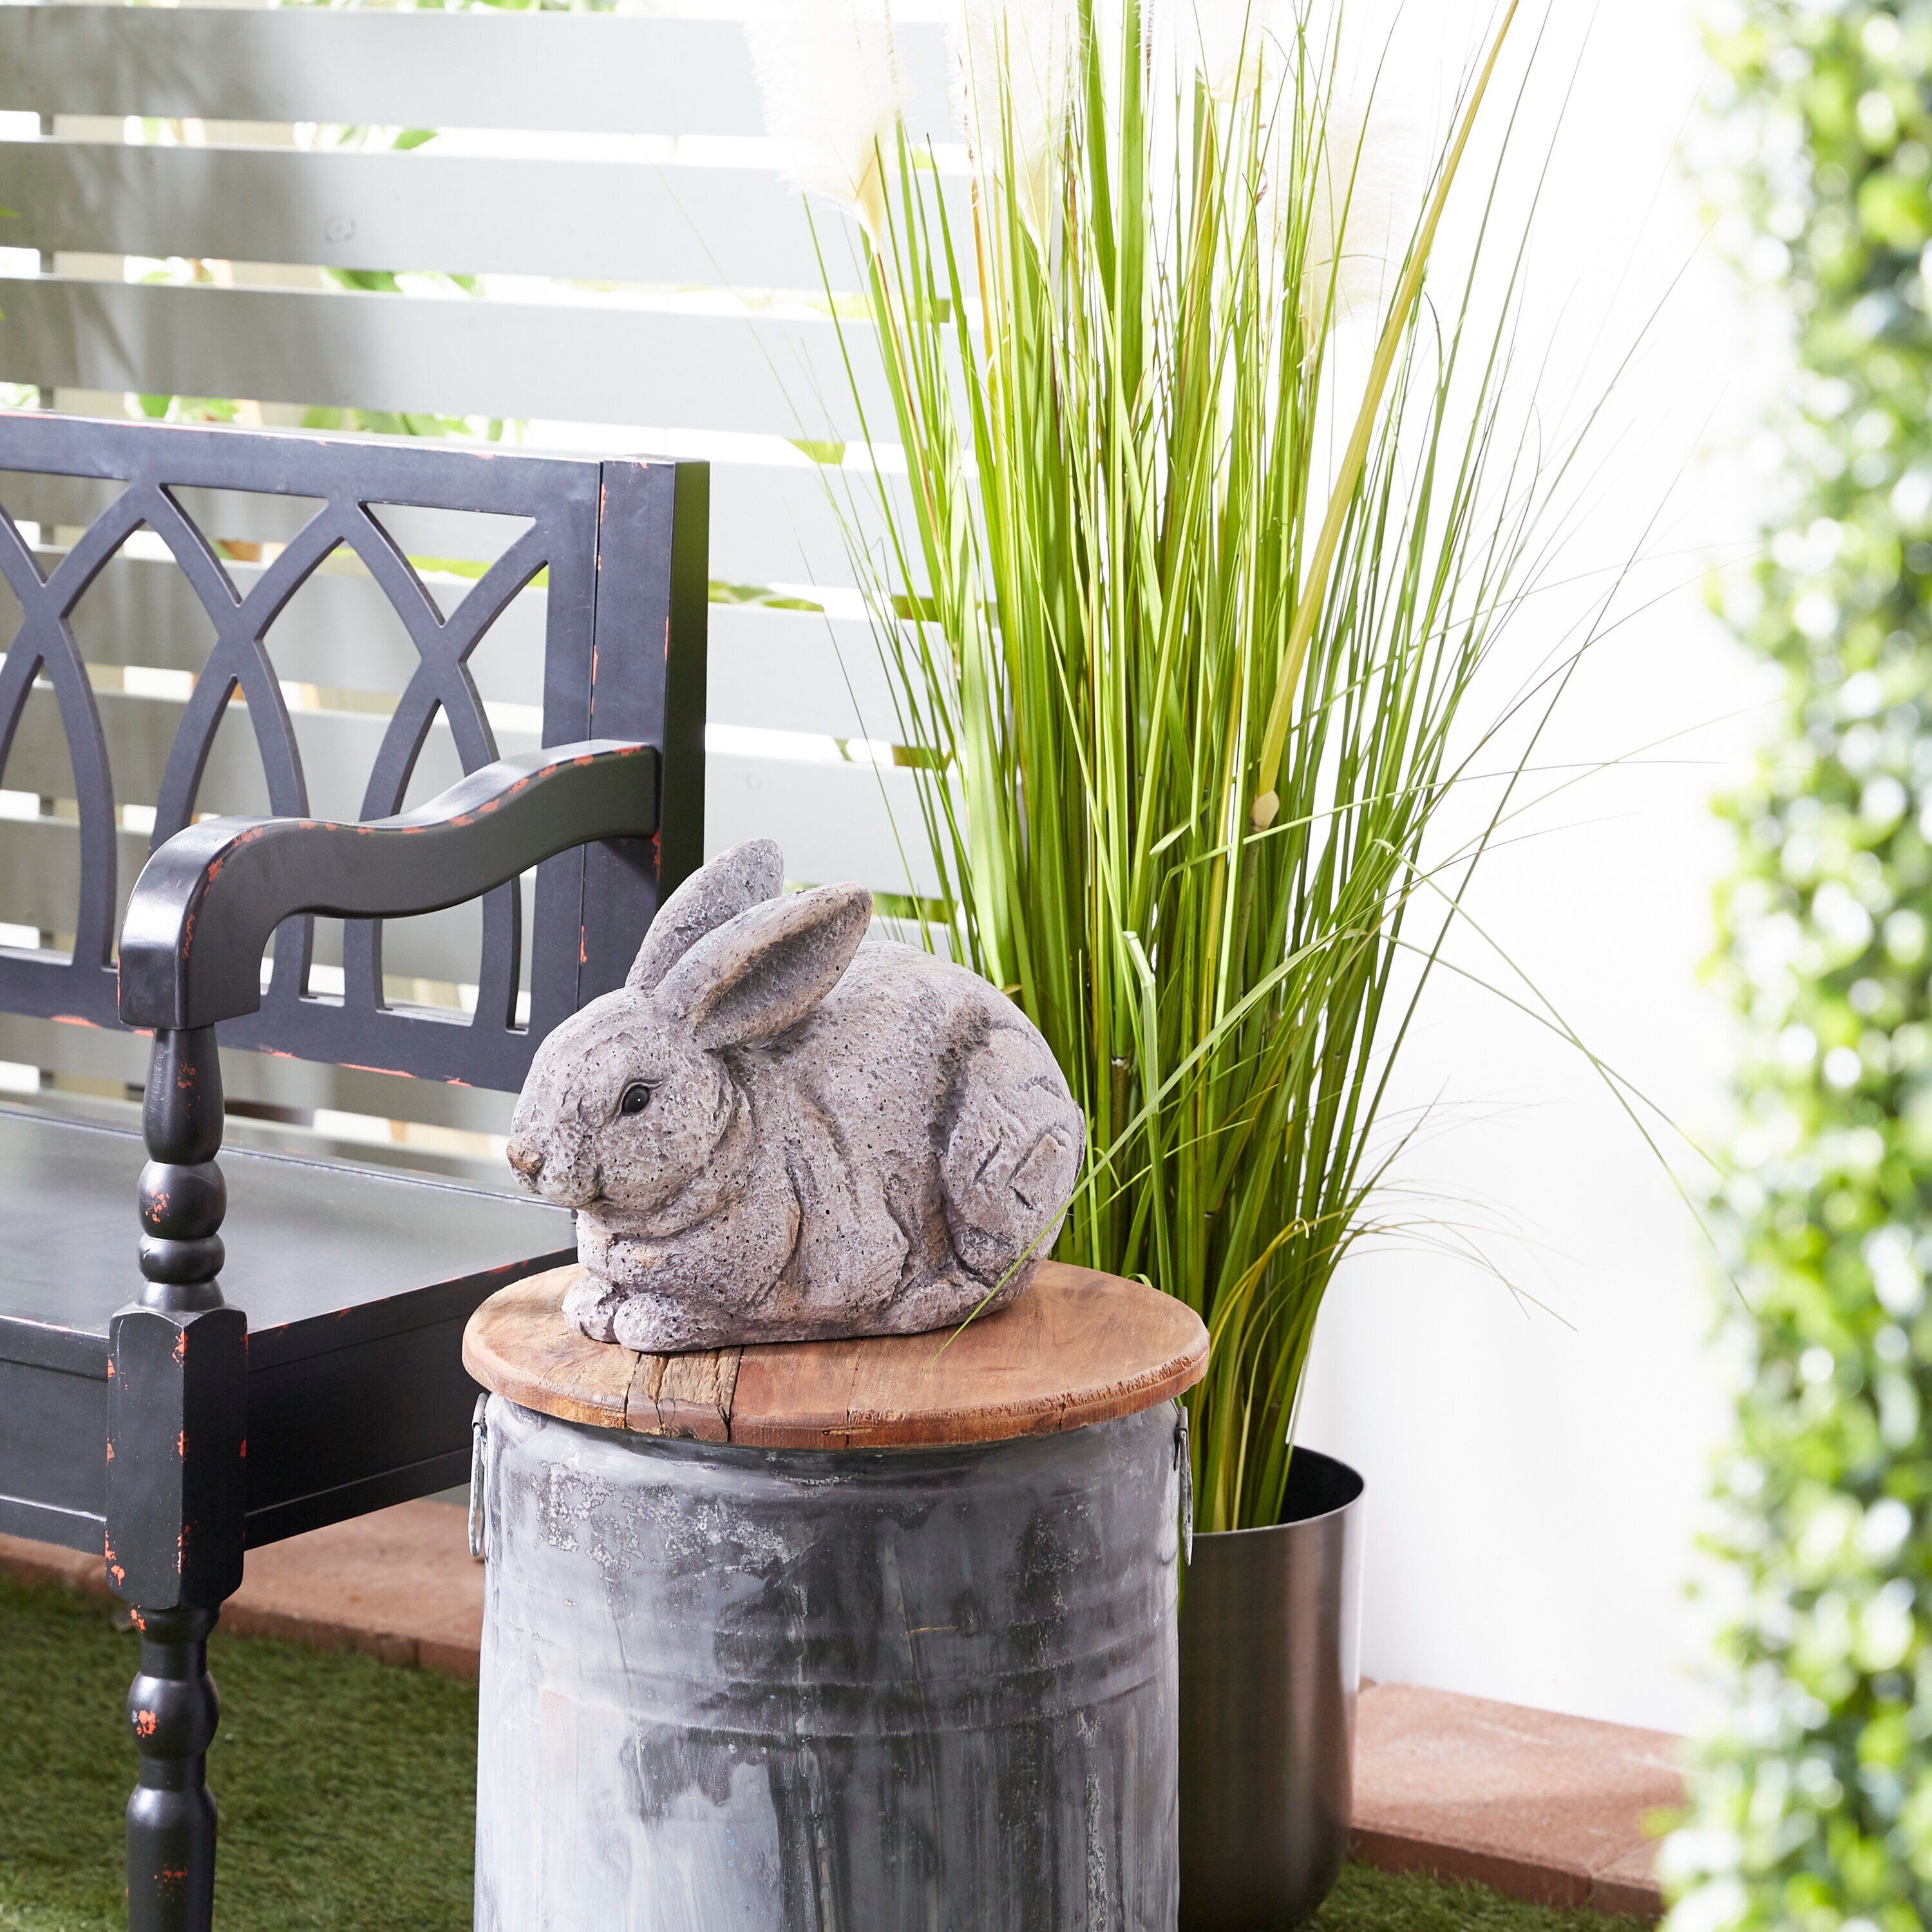 Grayson Lane 10-in H x 14-in W Gray Rabbit Garden Statue at Lowes.com